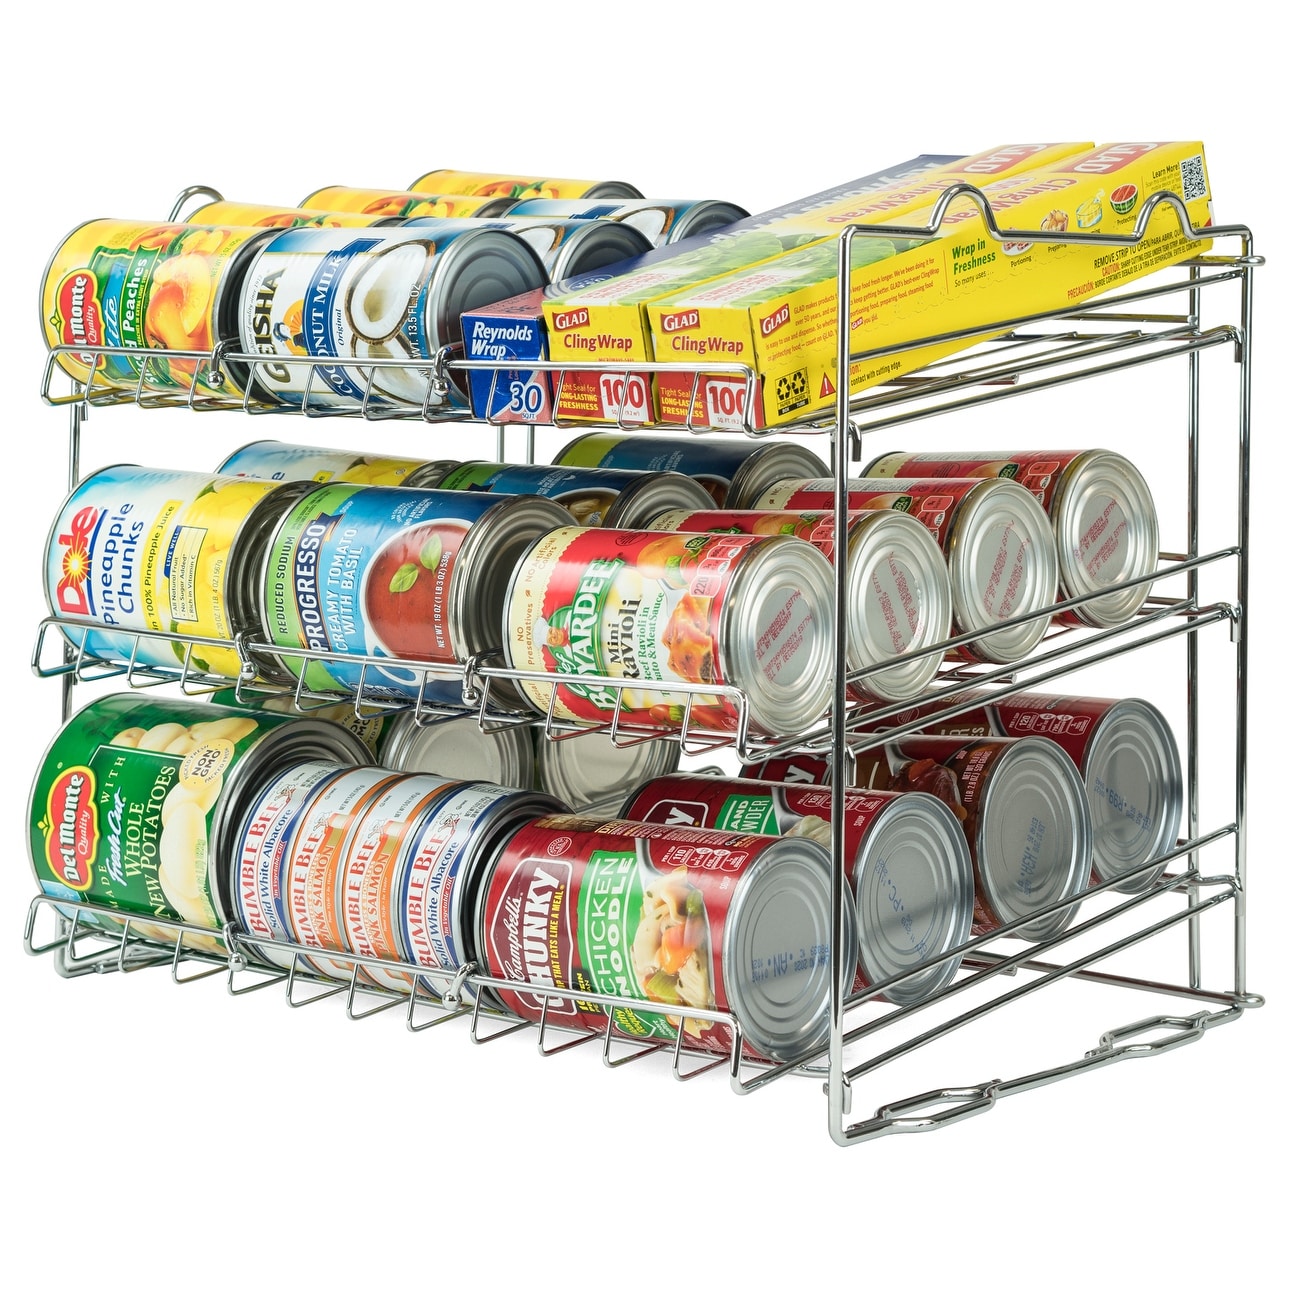 https://ak1.ostkcdn.com/images/products/is/images/direct/cf8784486f42d160326bf5791e9c49d1e6cba7a0/Stackable-Can-Organizer.jpg